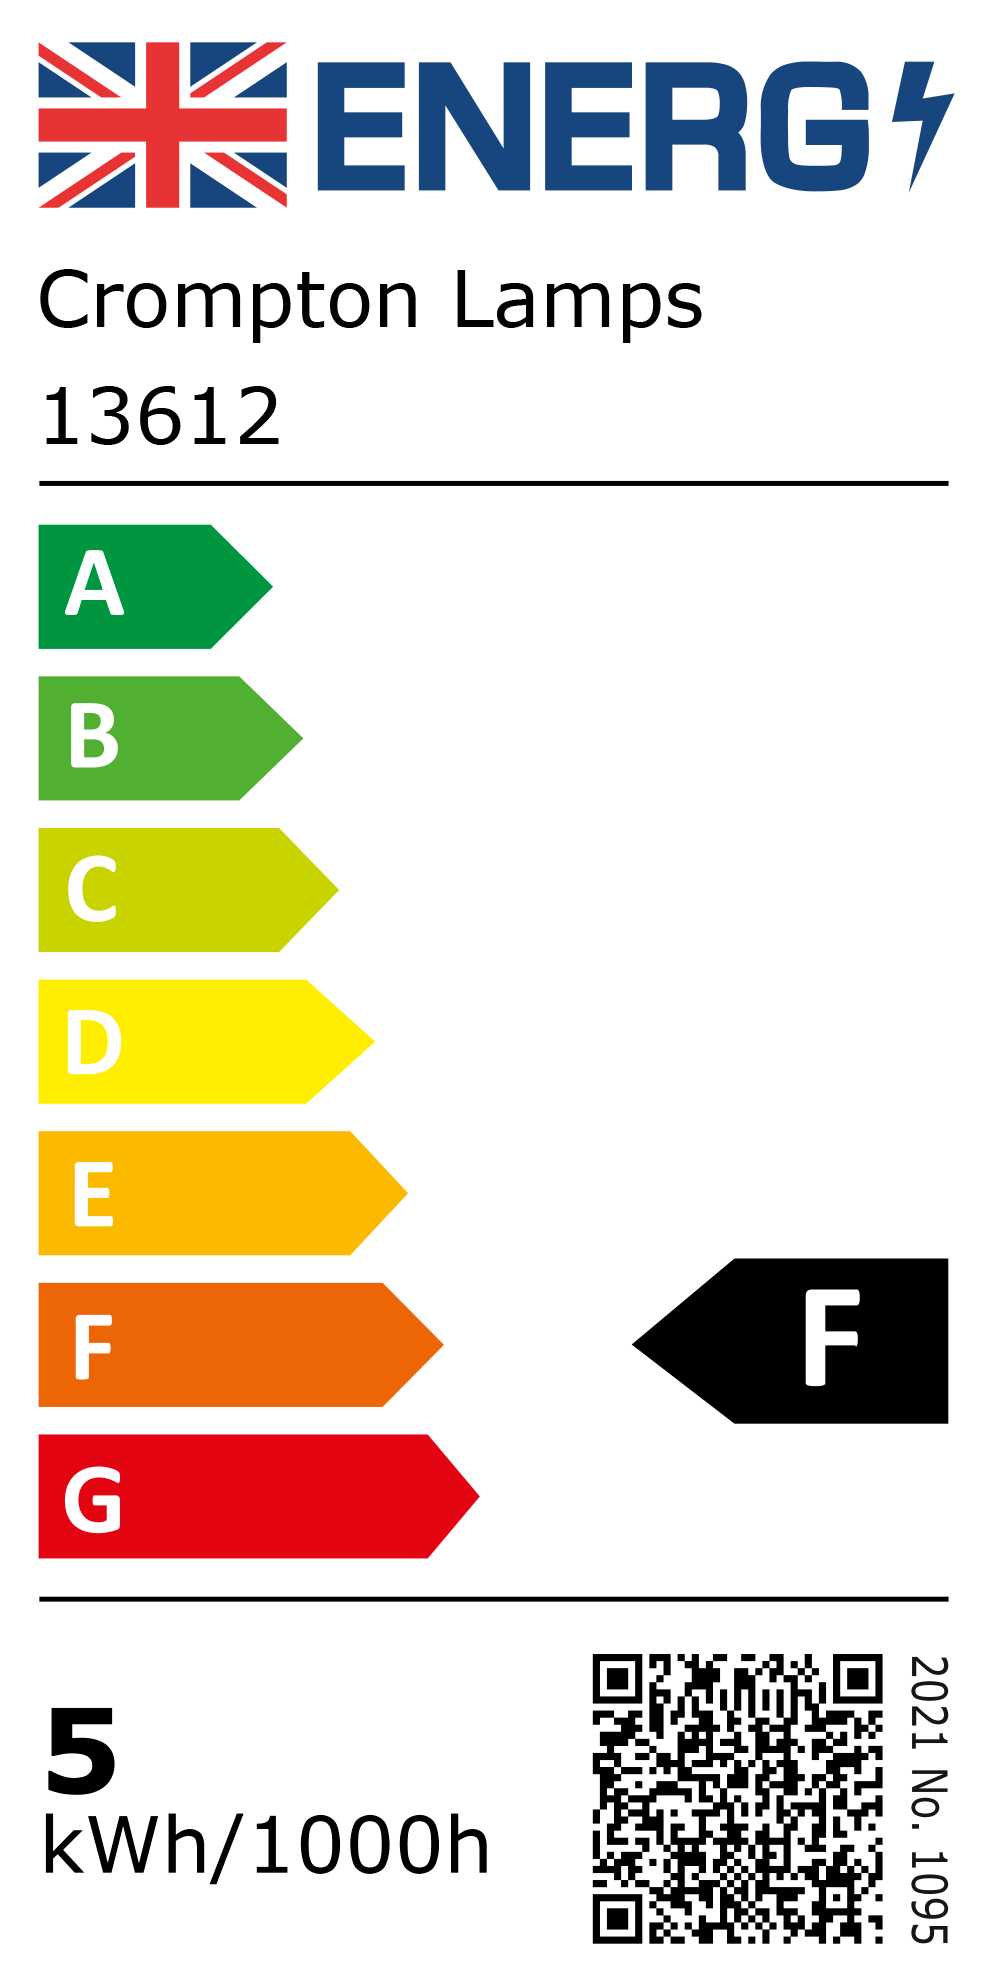 New 2021 Energy Rating Label: Stock Code 13612